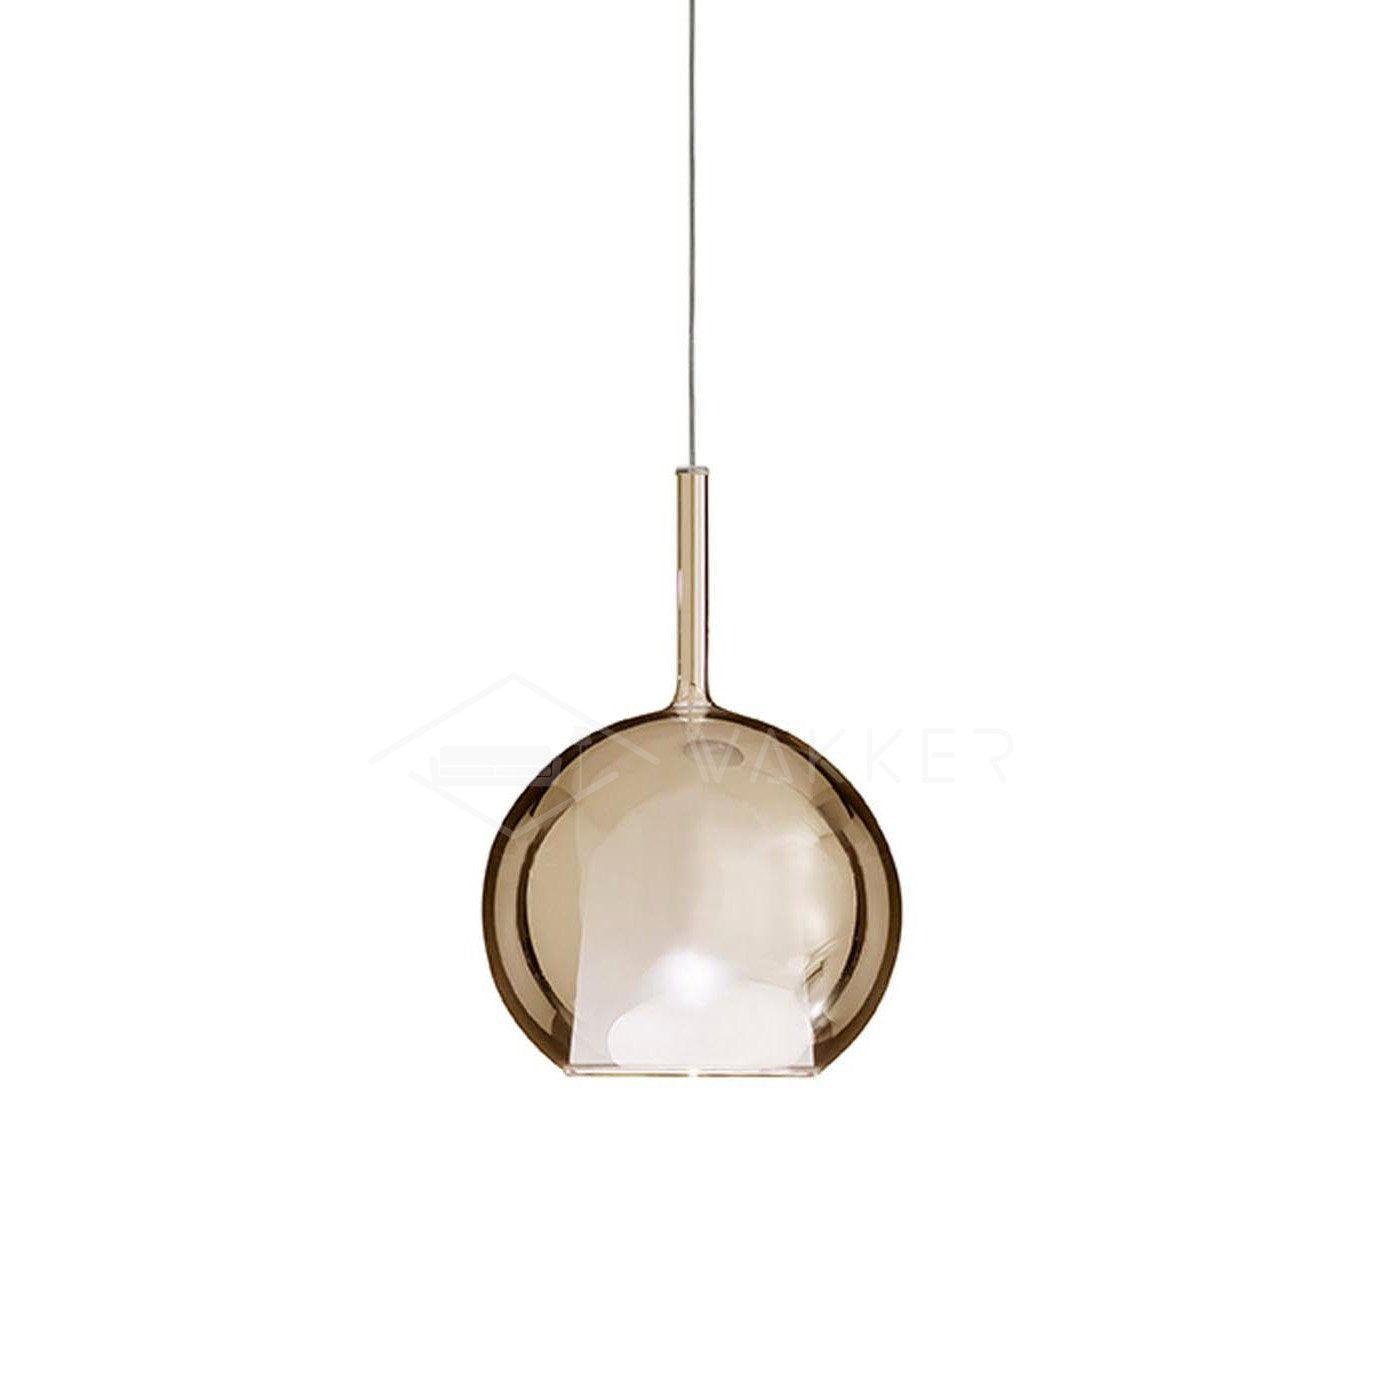 Glo Pendant Light in Light Amber, Diameter 7.9 inches x Height 14.2 inches (20cm x 36cm)